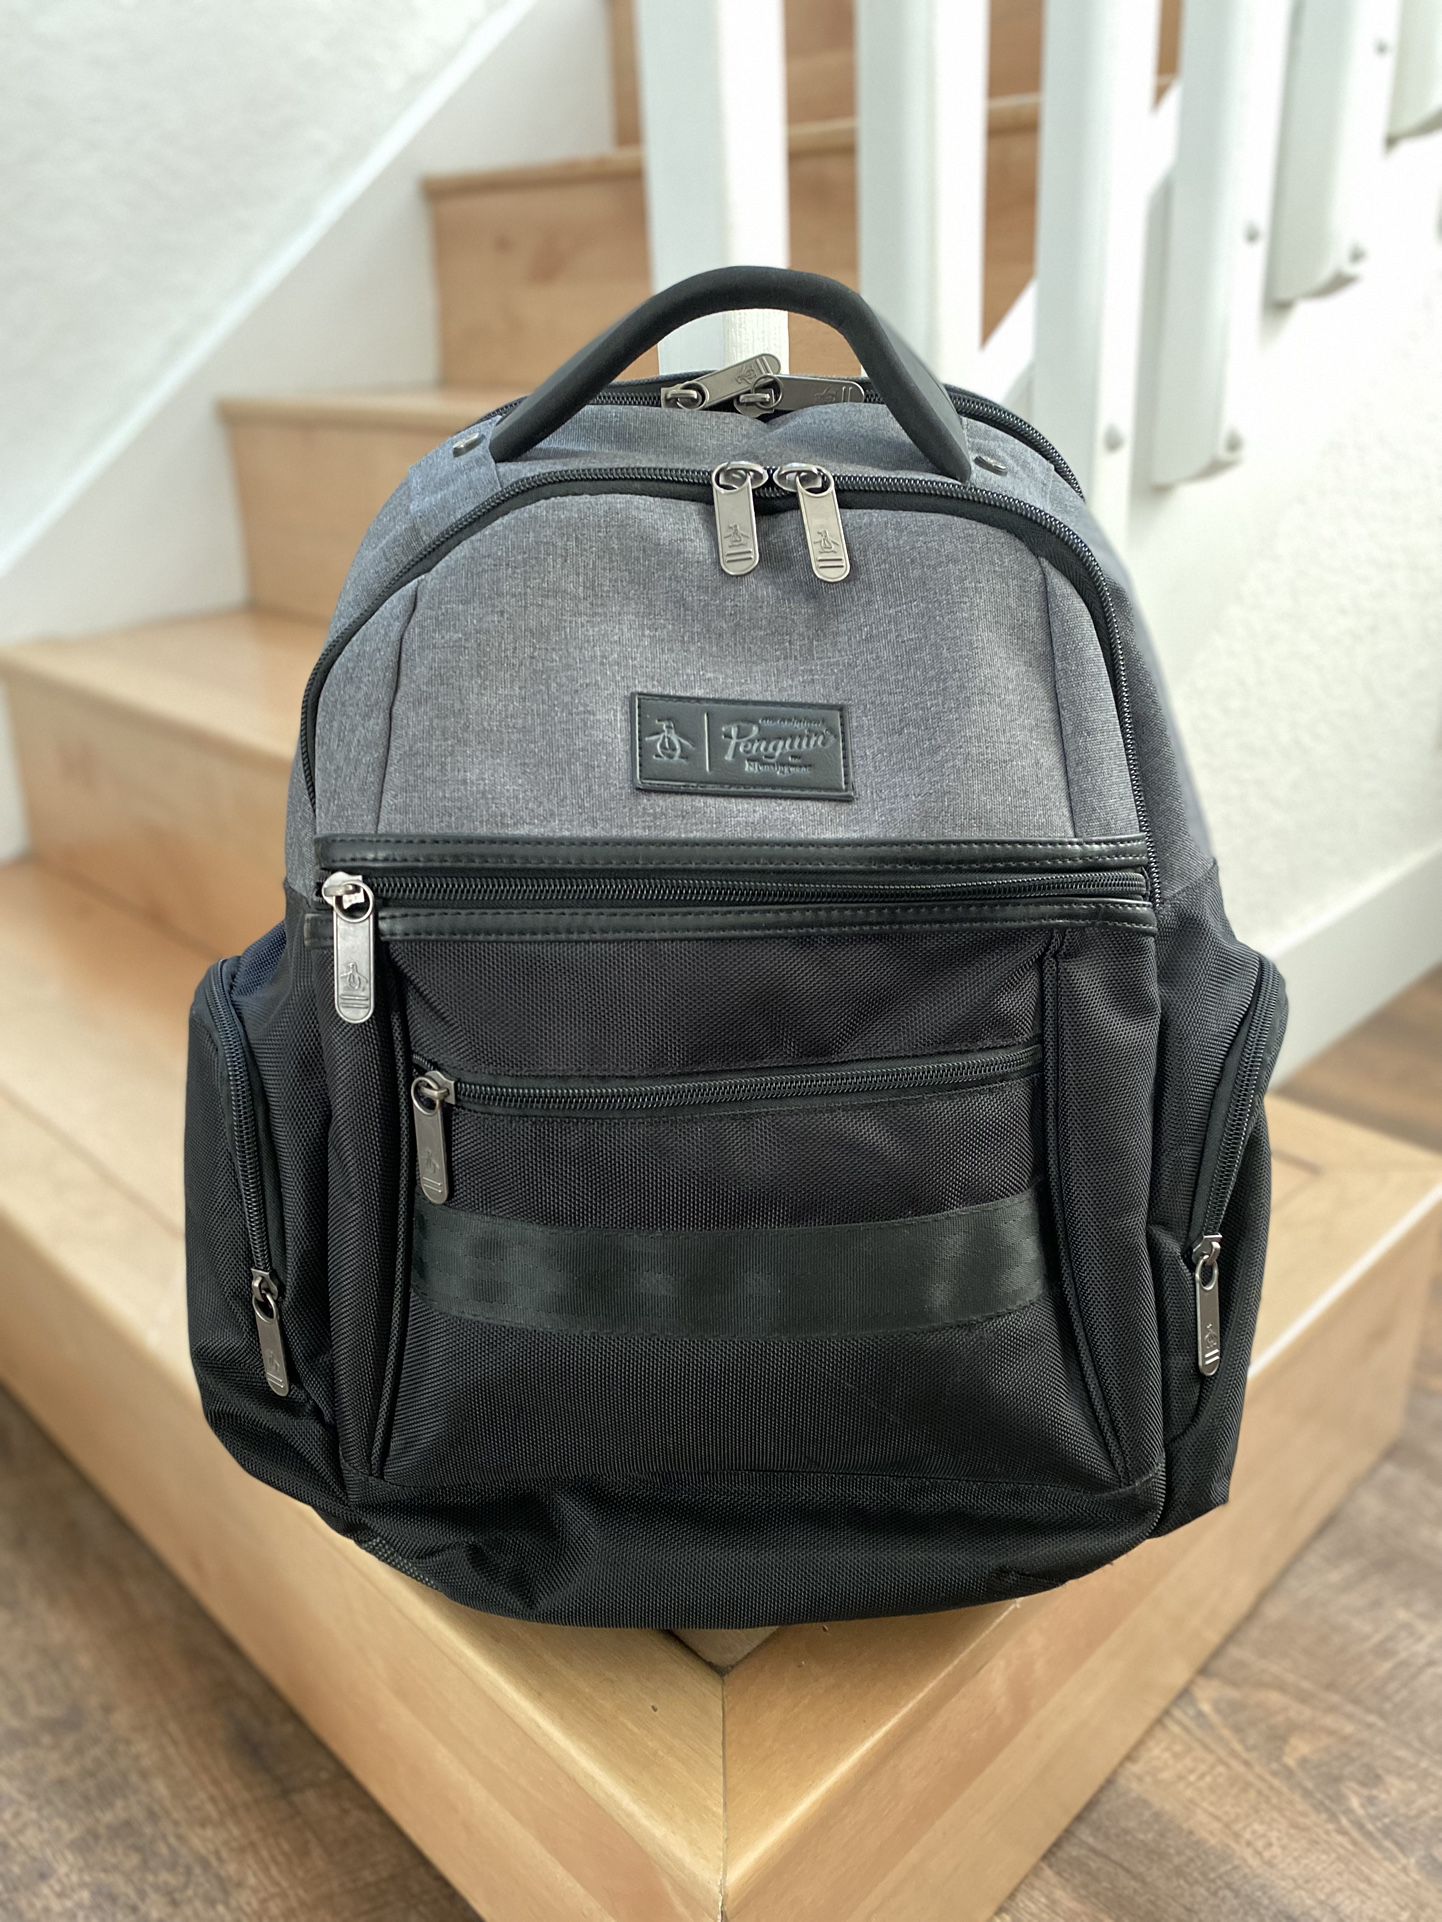 New Without Tags Original Penguin Men’s Black and Grey Laptop Backpack 